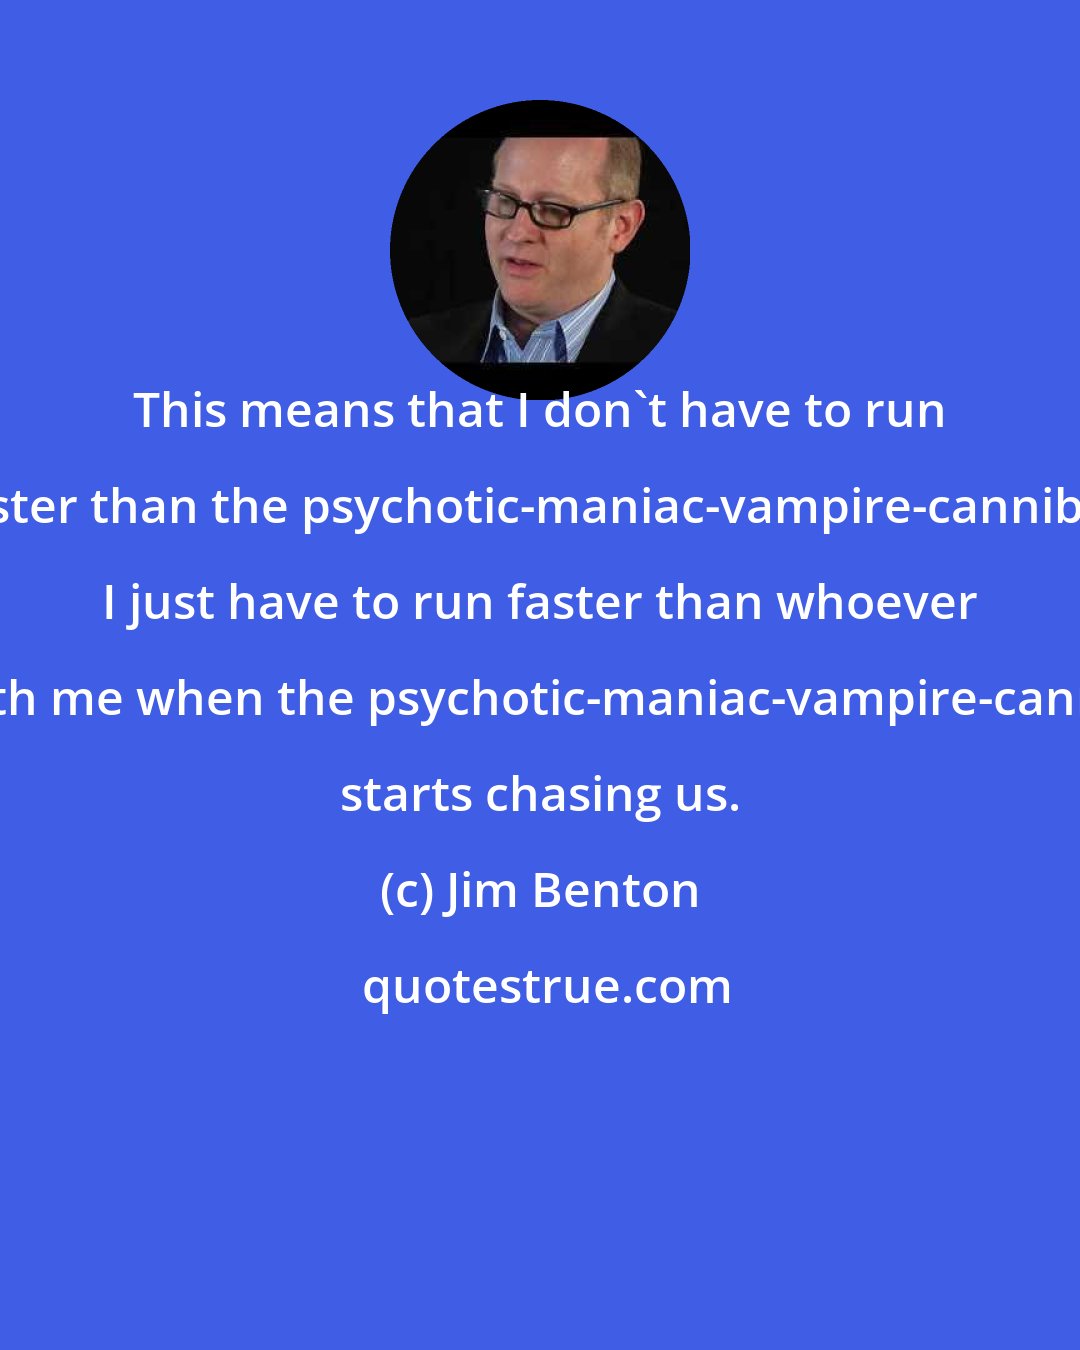 Jim Benton: This means that I don't have to run faster than the psychotic-maniac-vampire-cannibal, I just have to run faster than whoever is with me when the psychotic-maniac-vampire-cannibal starts chasing us.